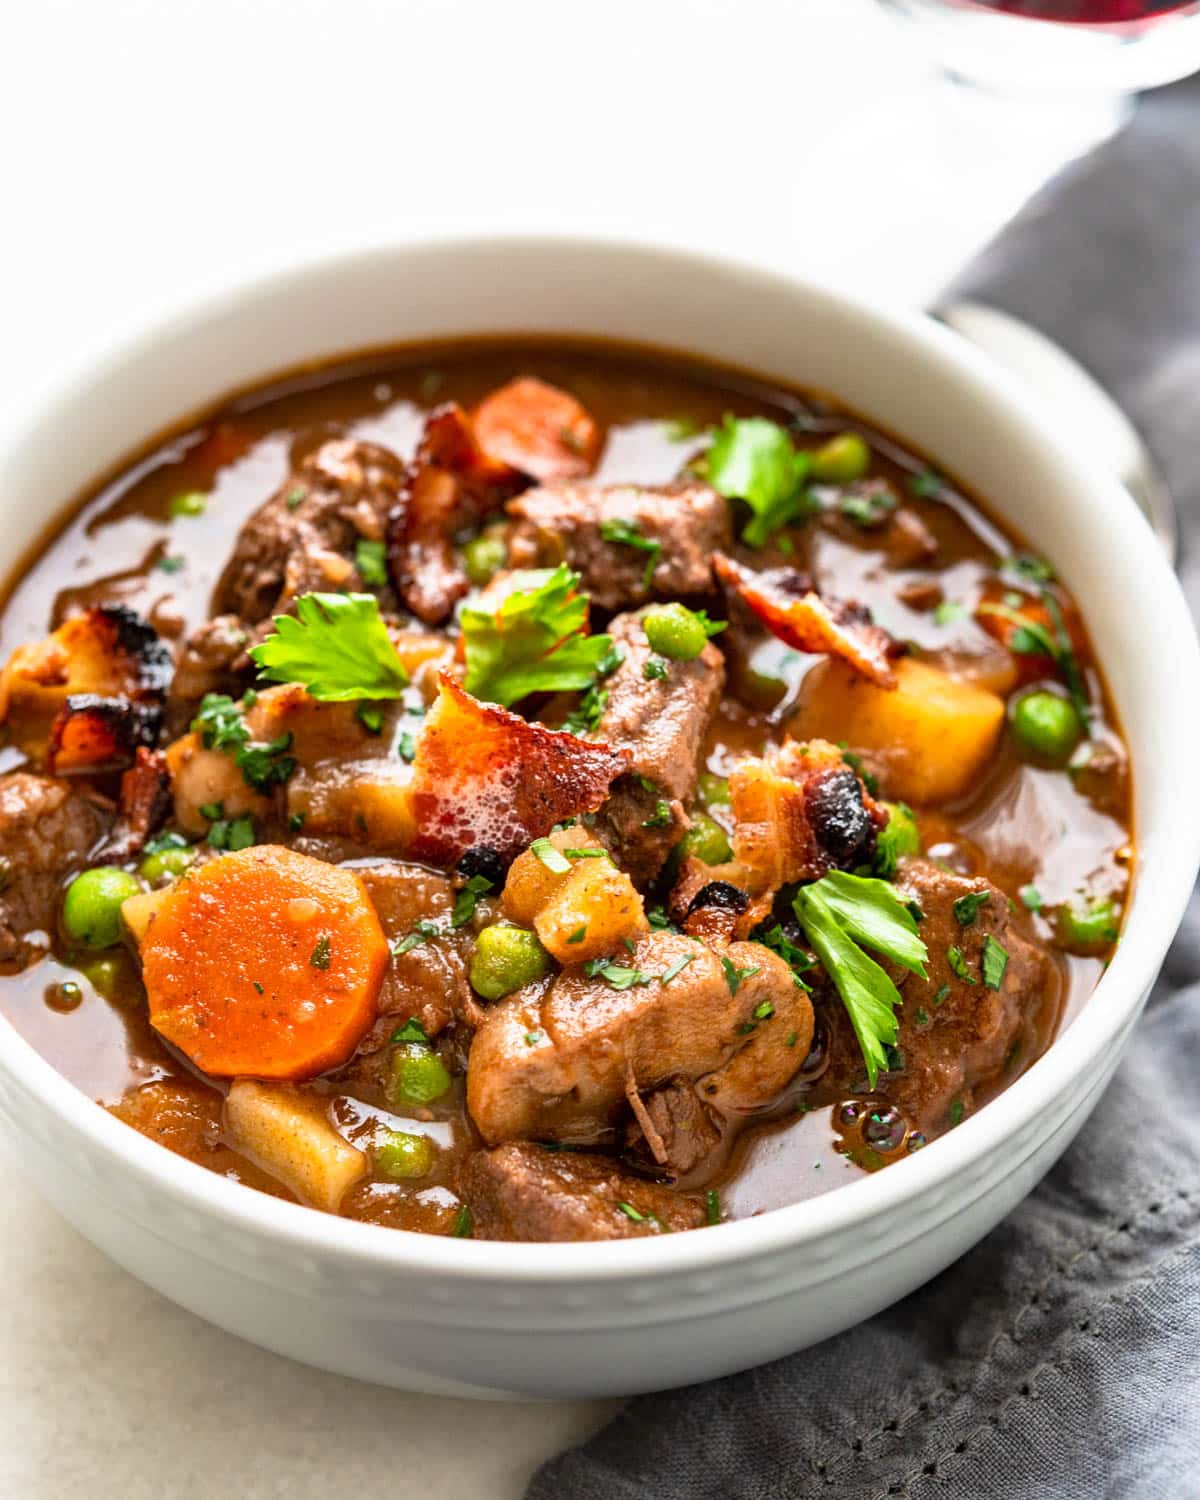 A hearty bowl of homemade beef stew.